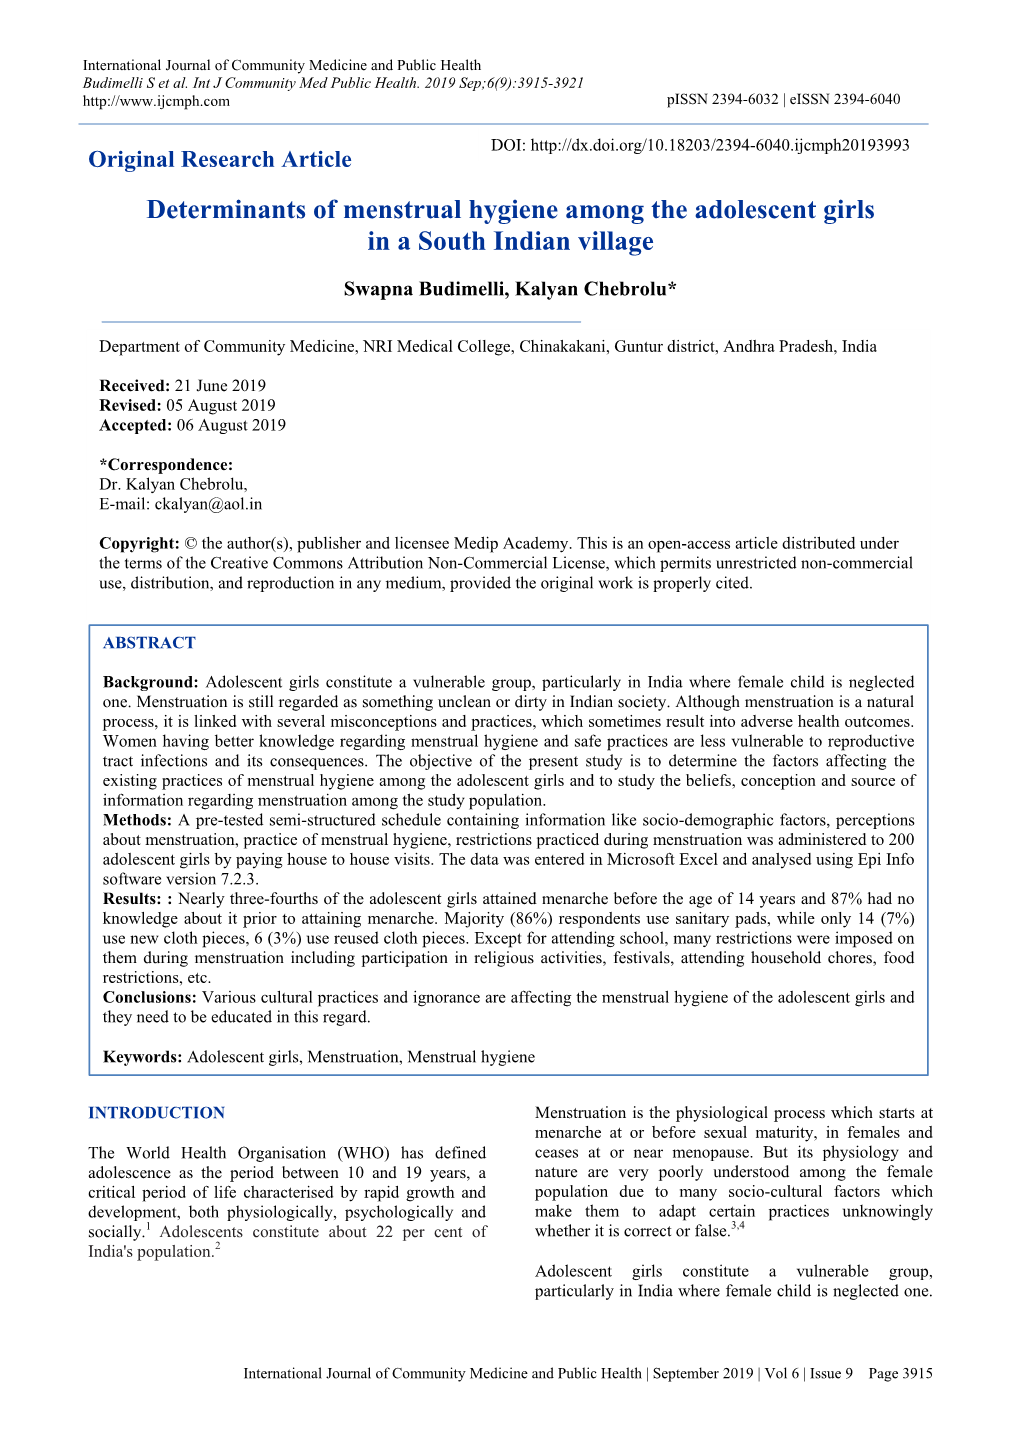 Determinants of Menstrual Hygiene Among the Adolescent Girls in a South Indian Village